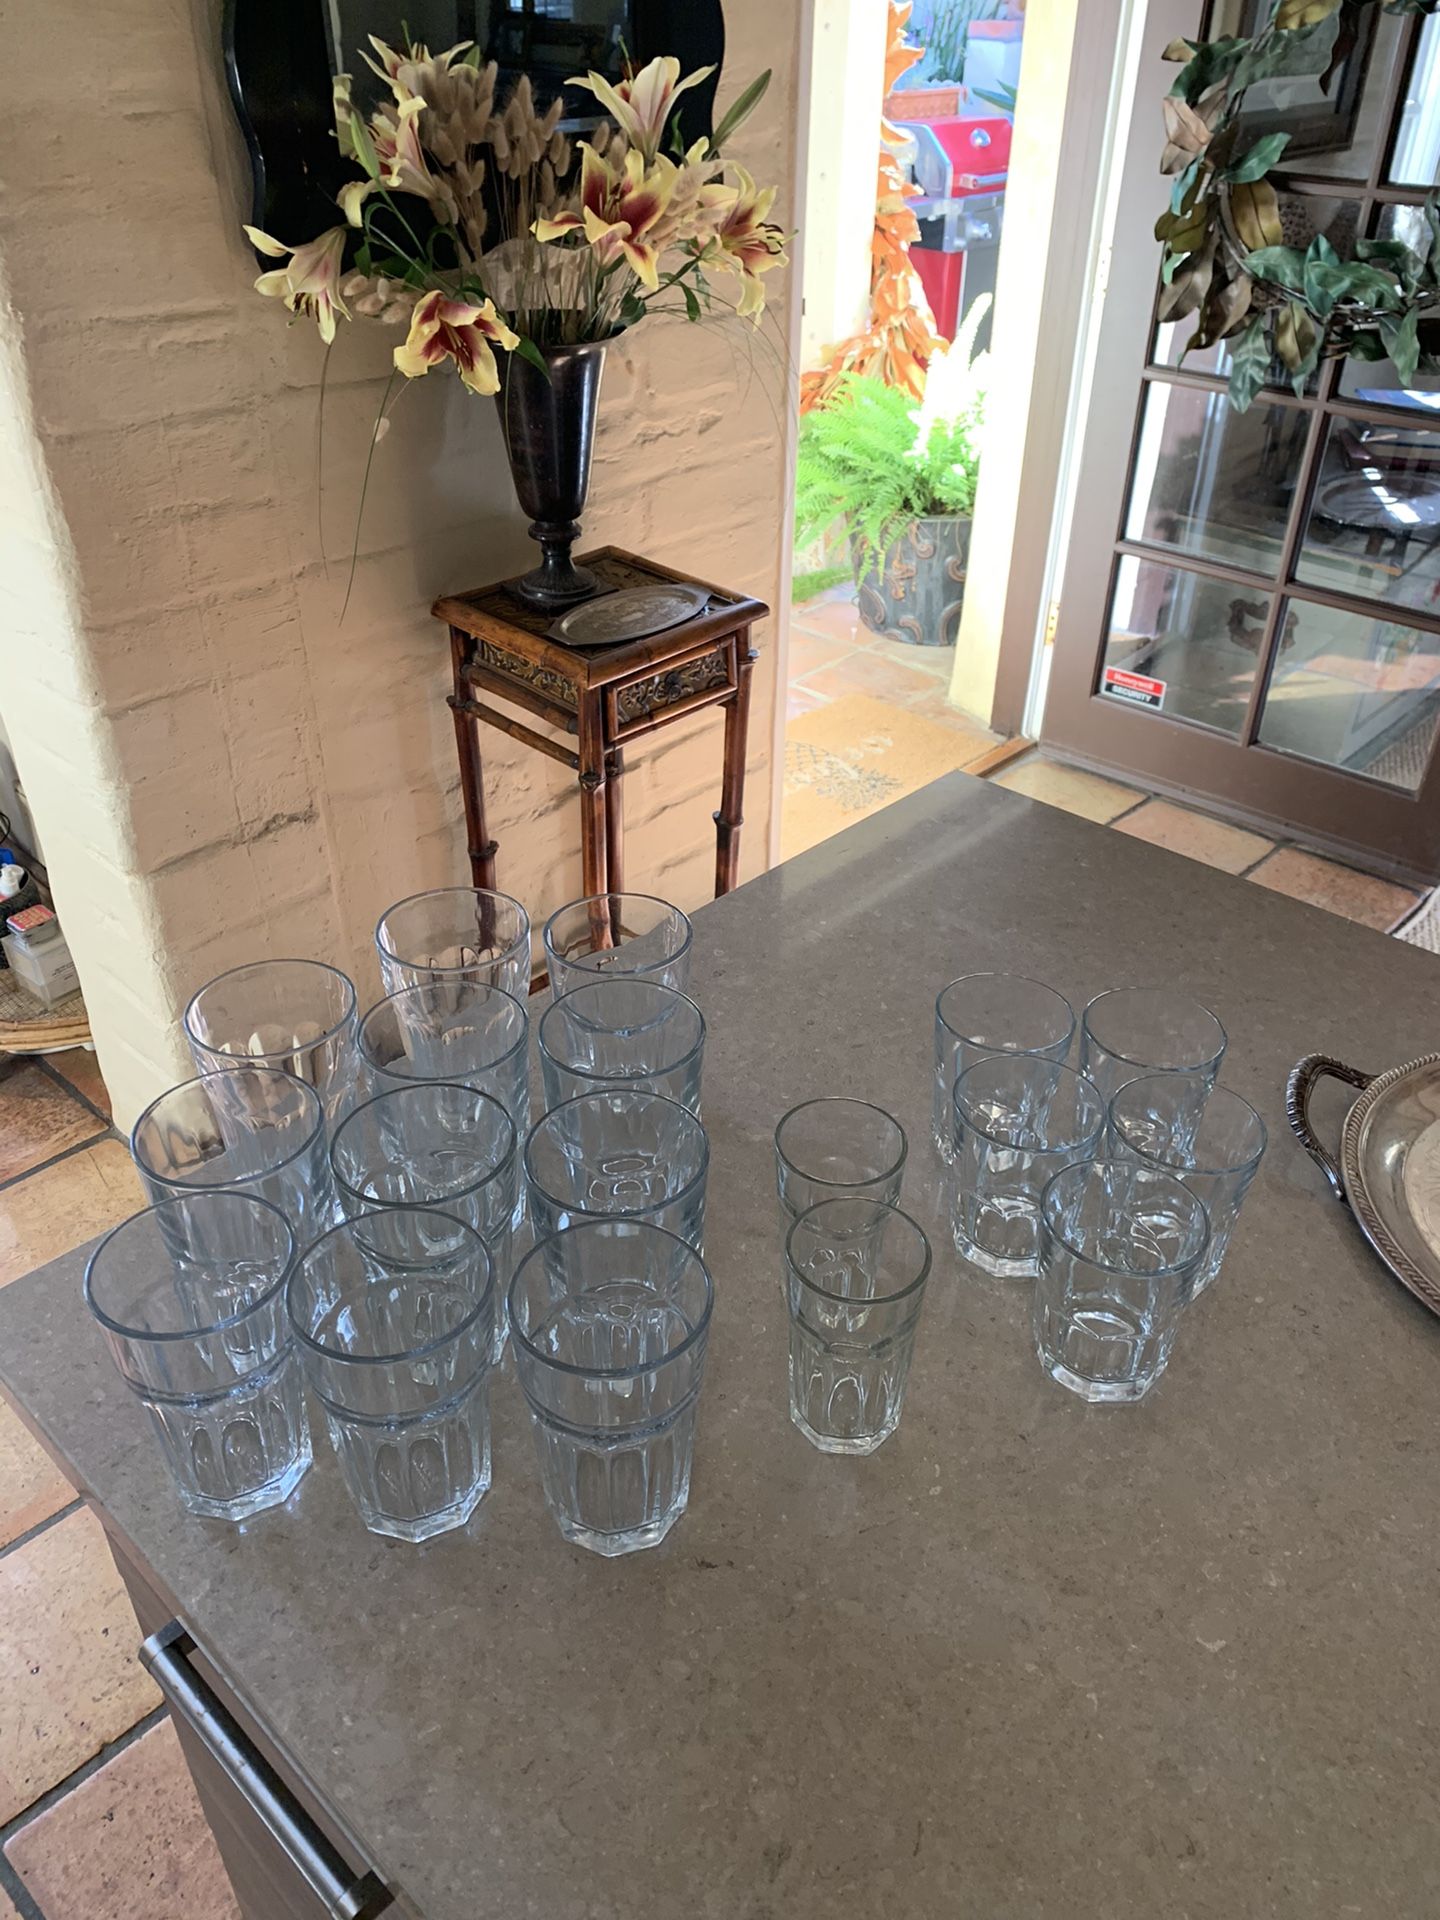 Pottery Barn Glassware: classic design 11 tall, 5 double old fashion and 2 juice/wine